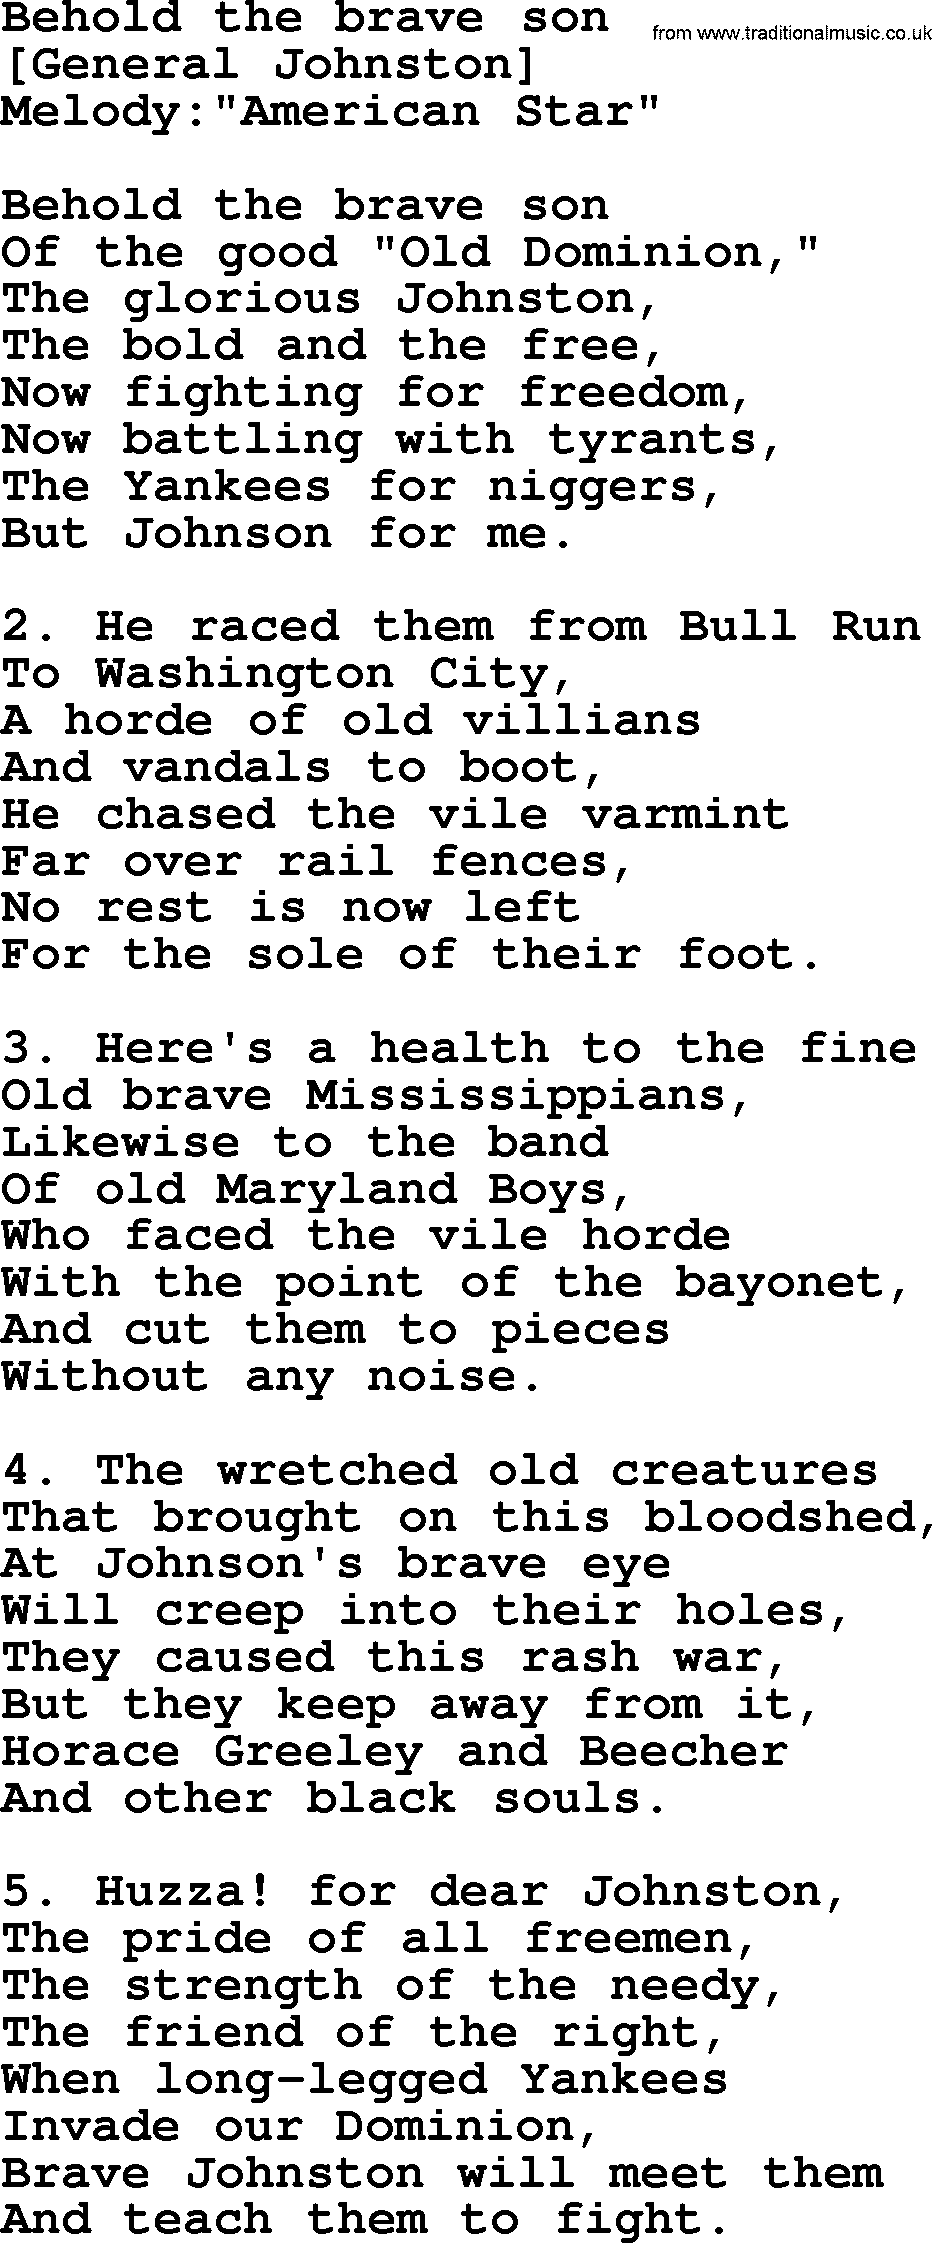 Old American Song: Behold The Brave Son, lyrics